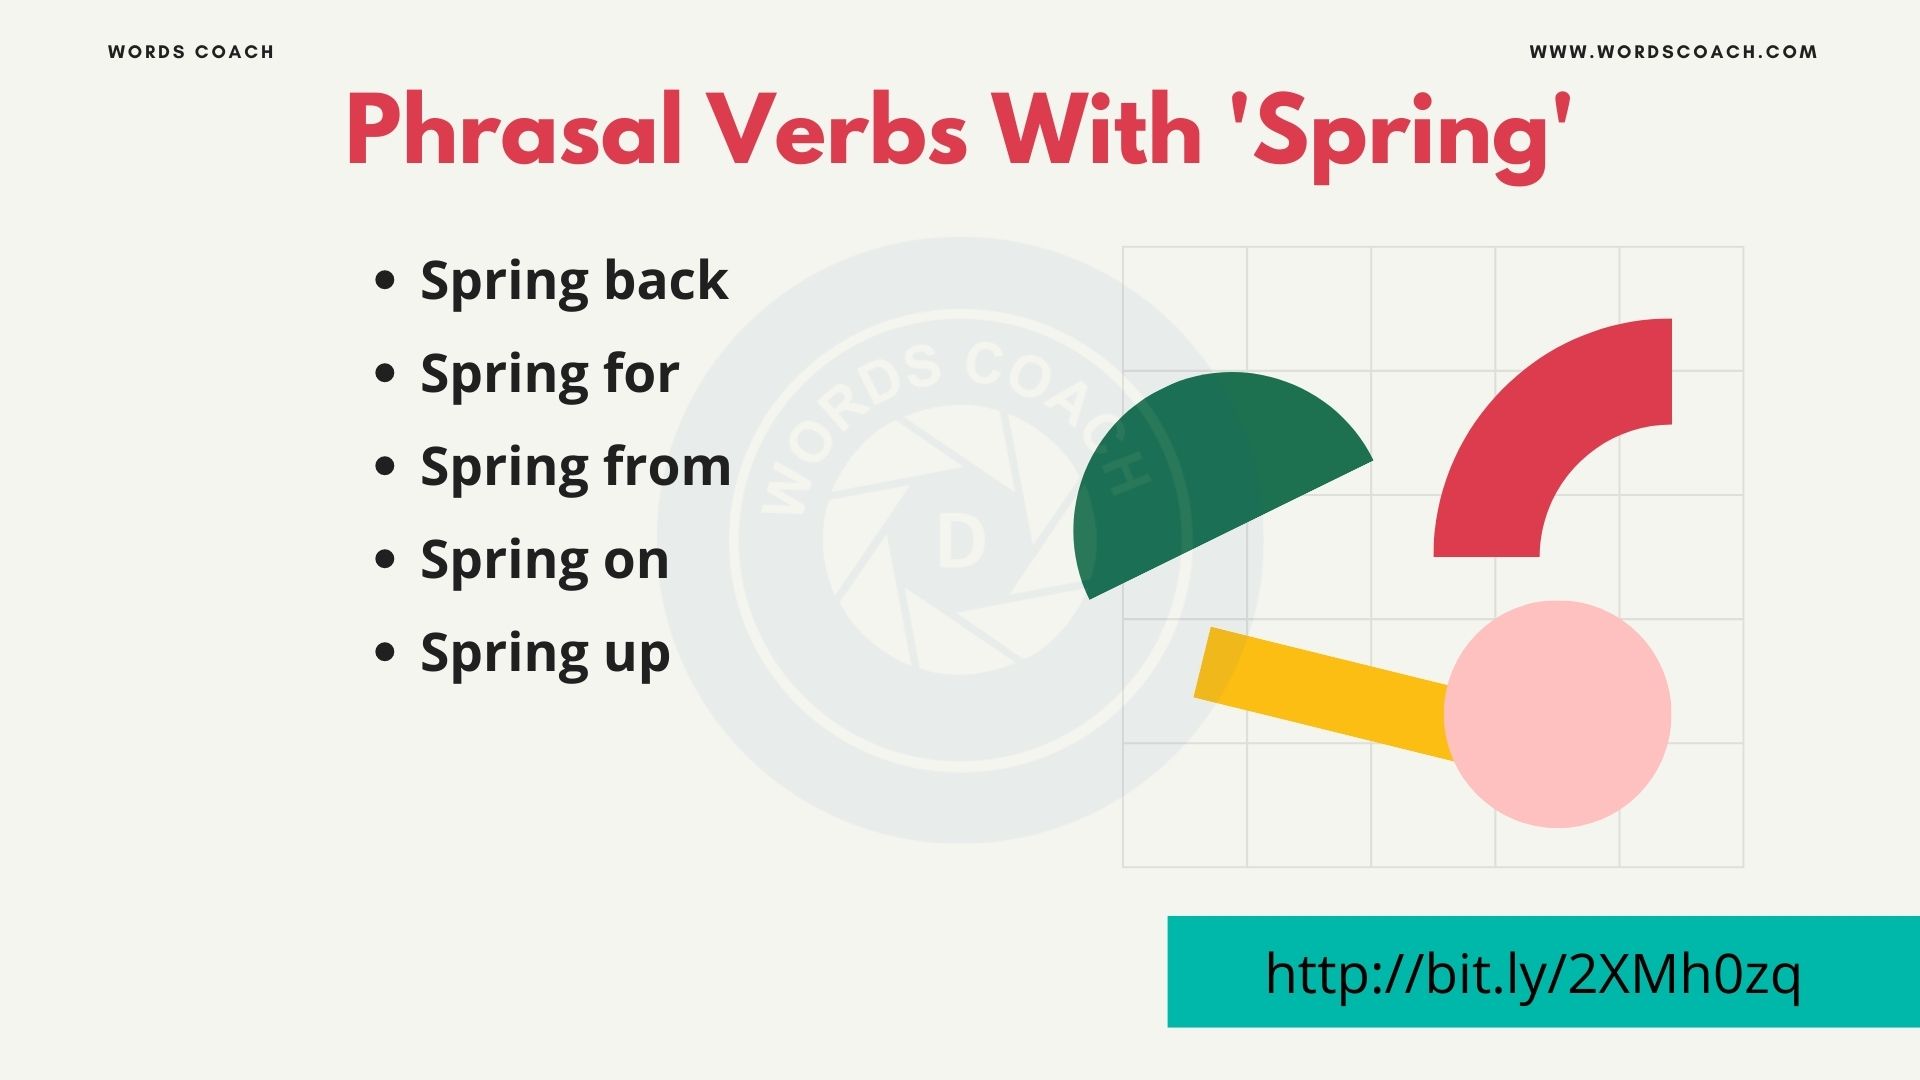 Phrasal Verbs With 'Spring'